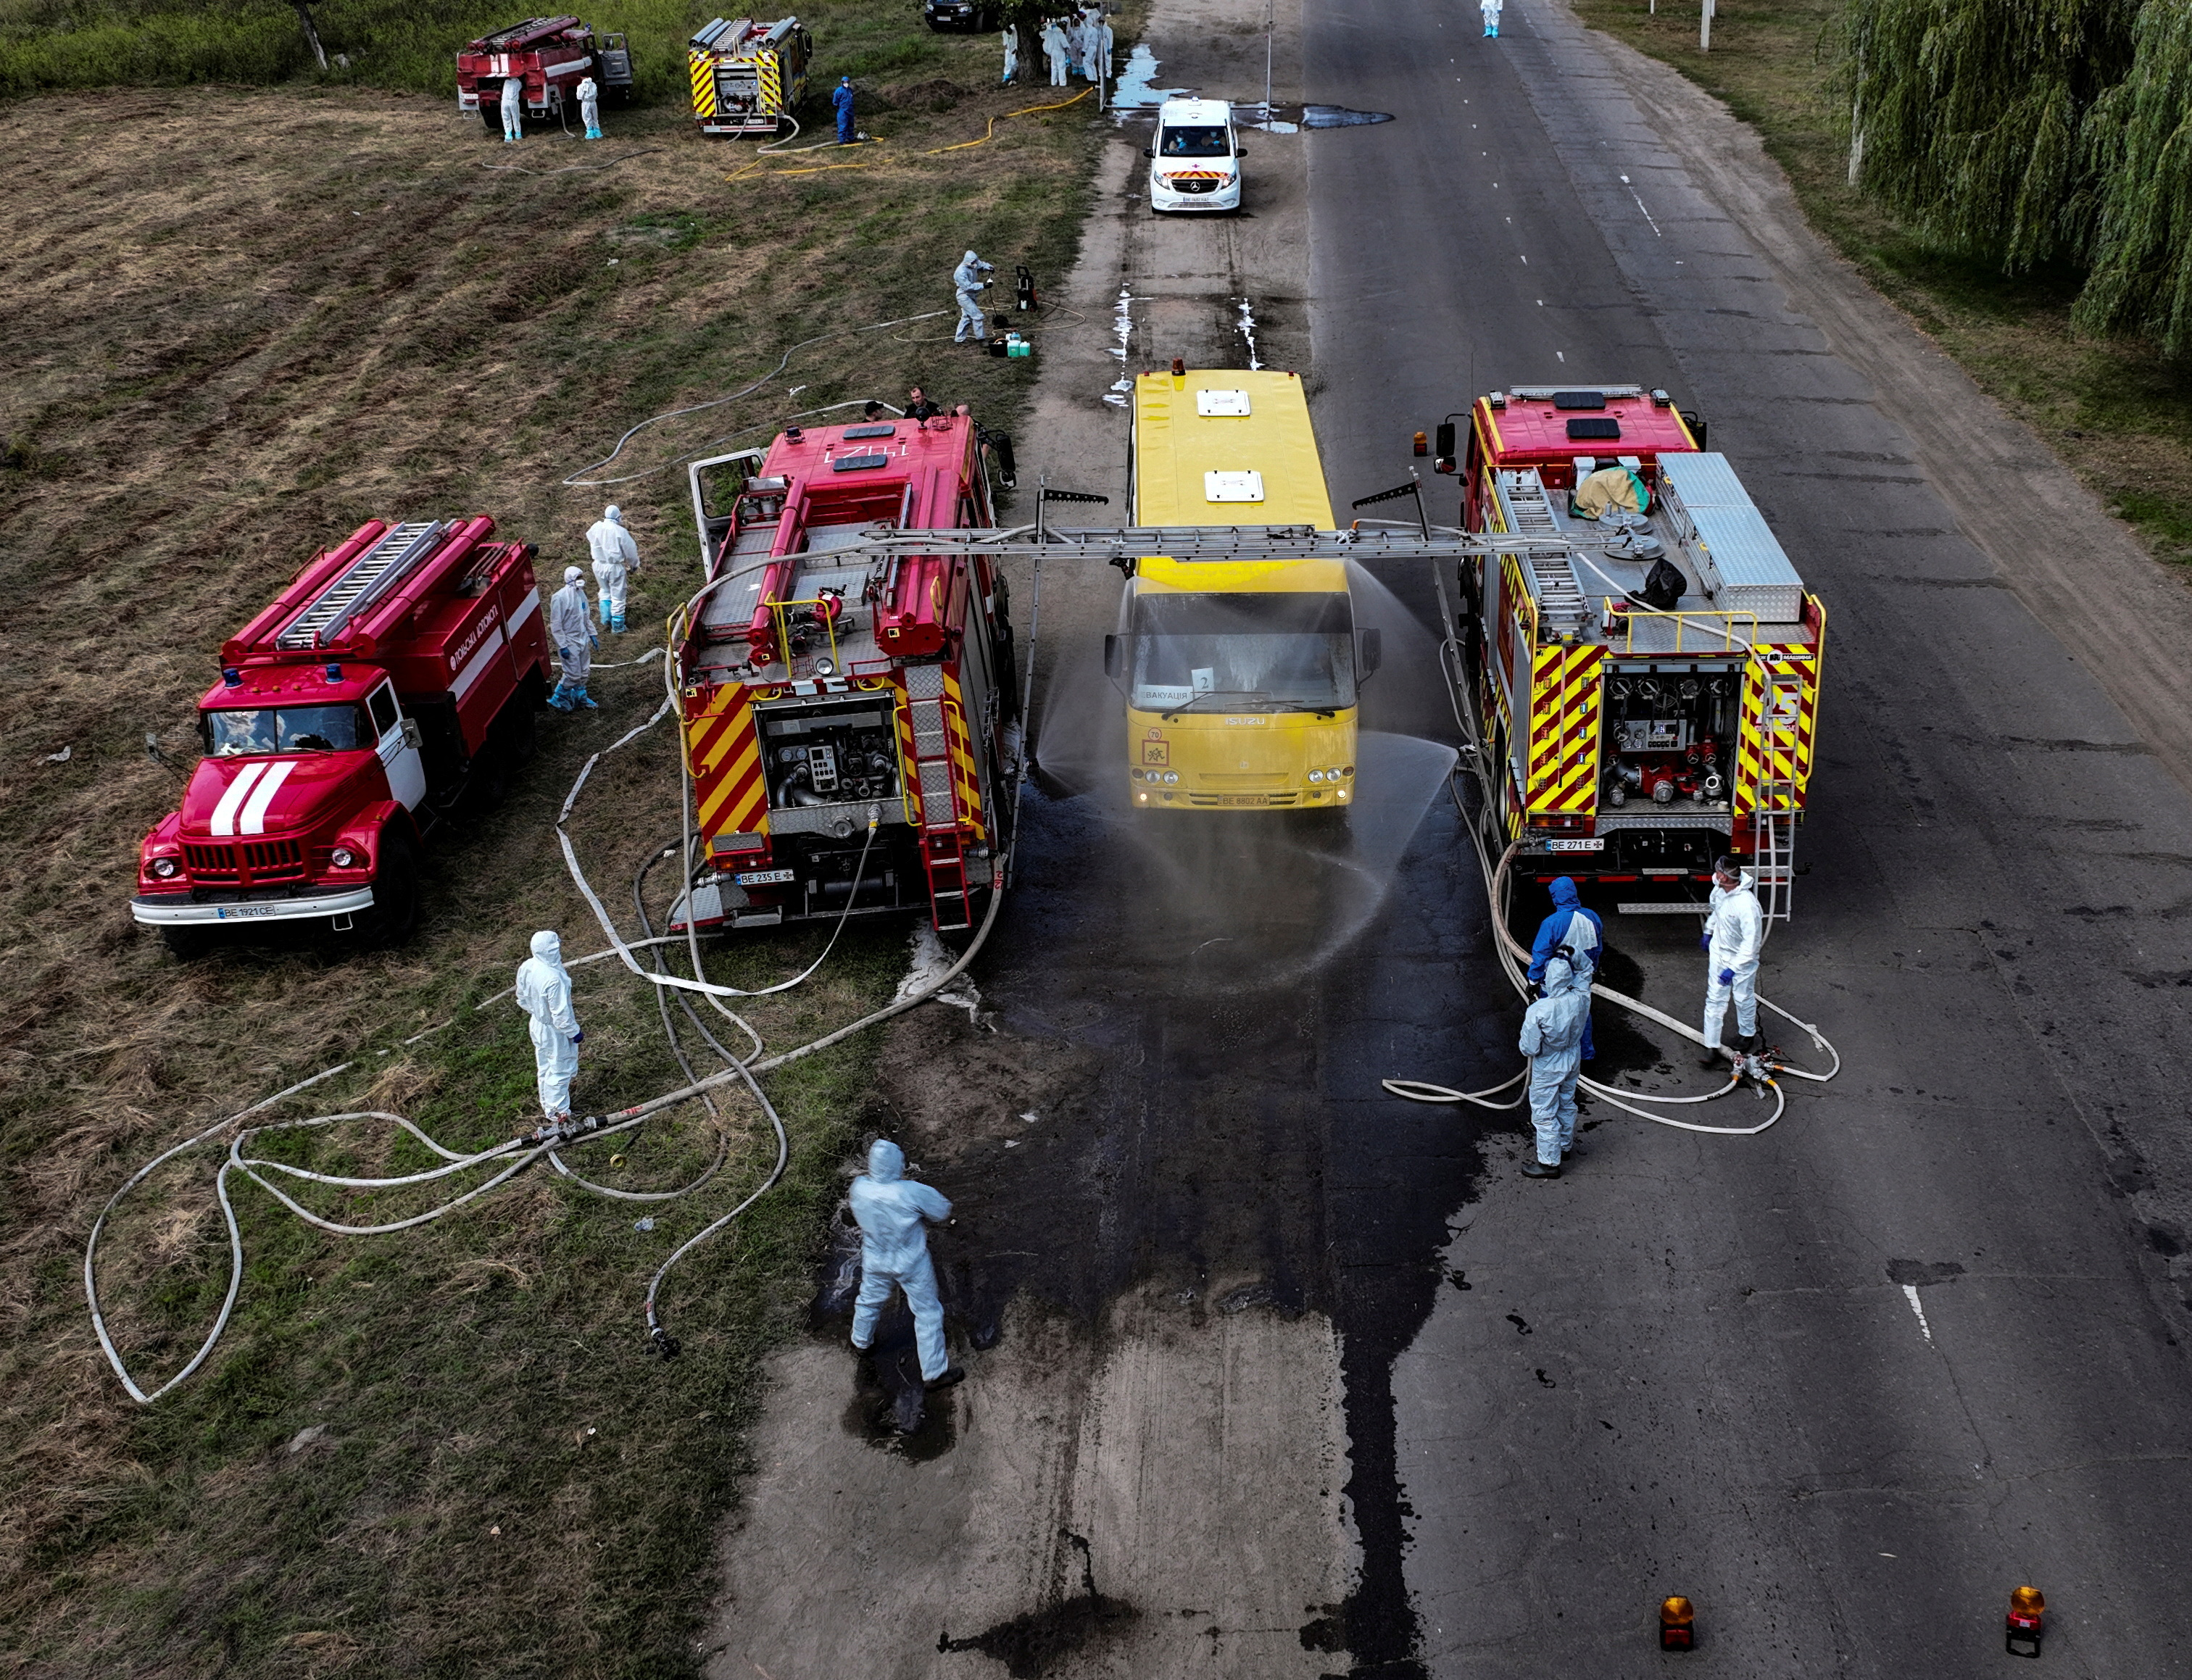 On Thursday, emergency workers attended nuclear disaster response drills to prepare for an emergency situation, at Pivdennoukrainsk nuclear power plant. /Reuters from handout